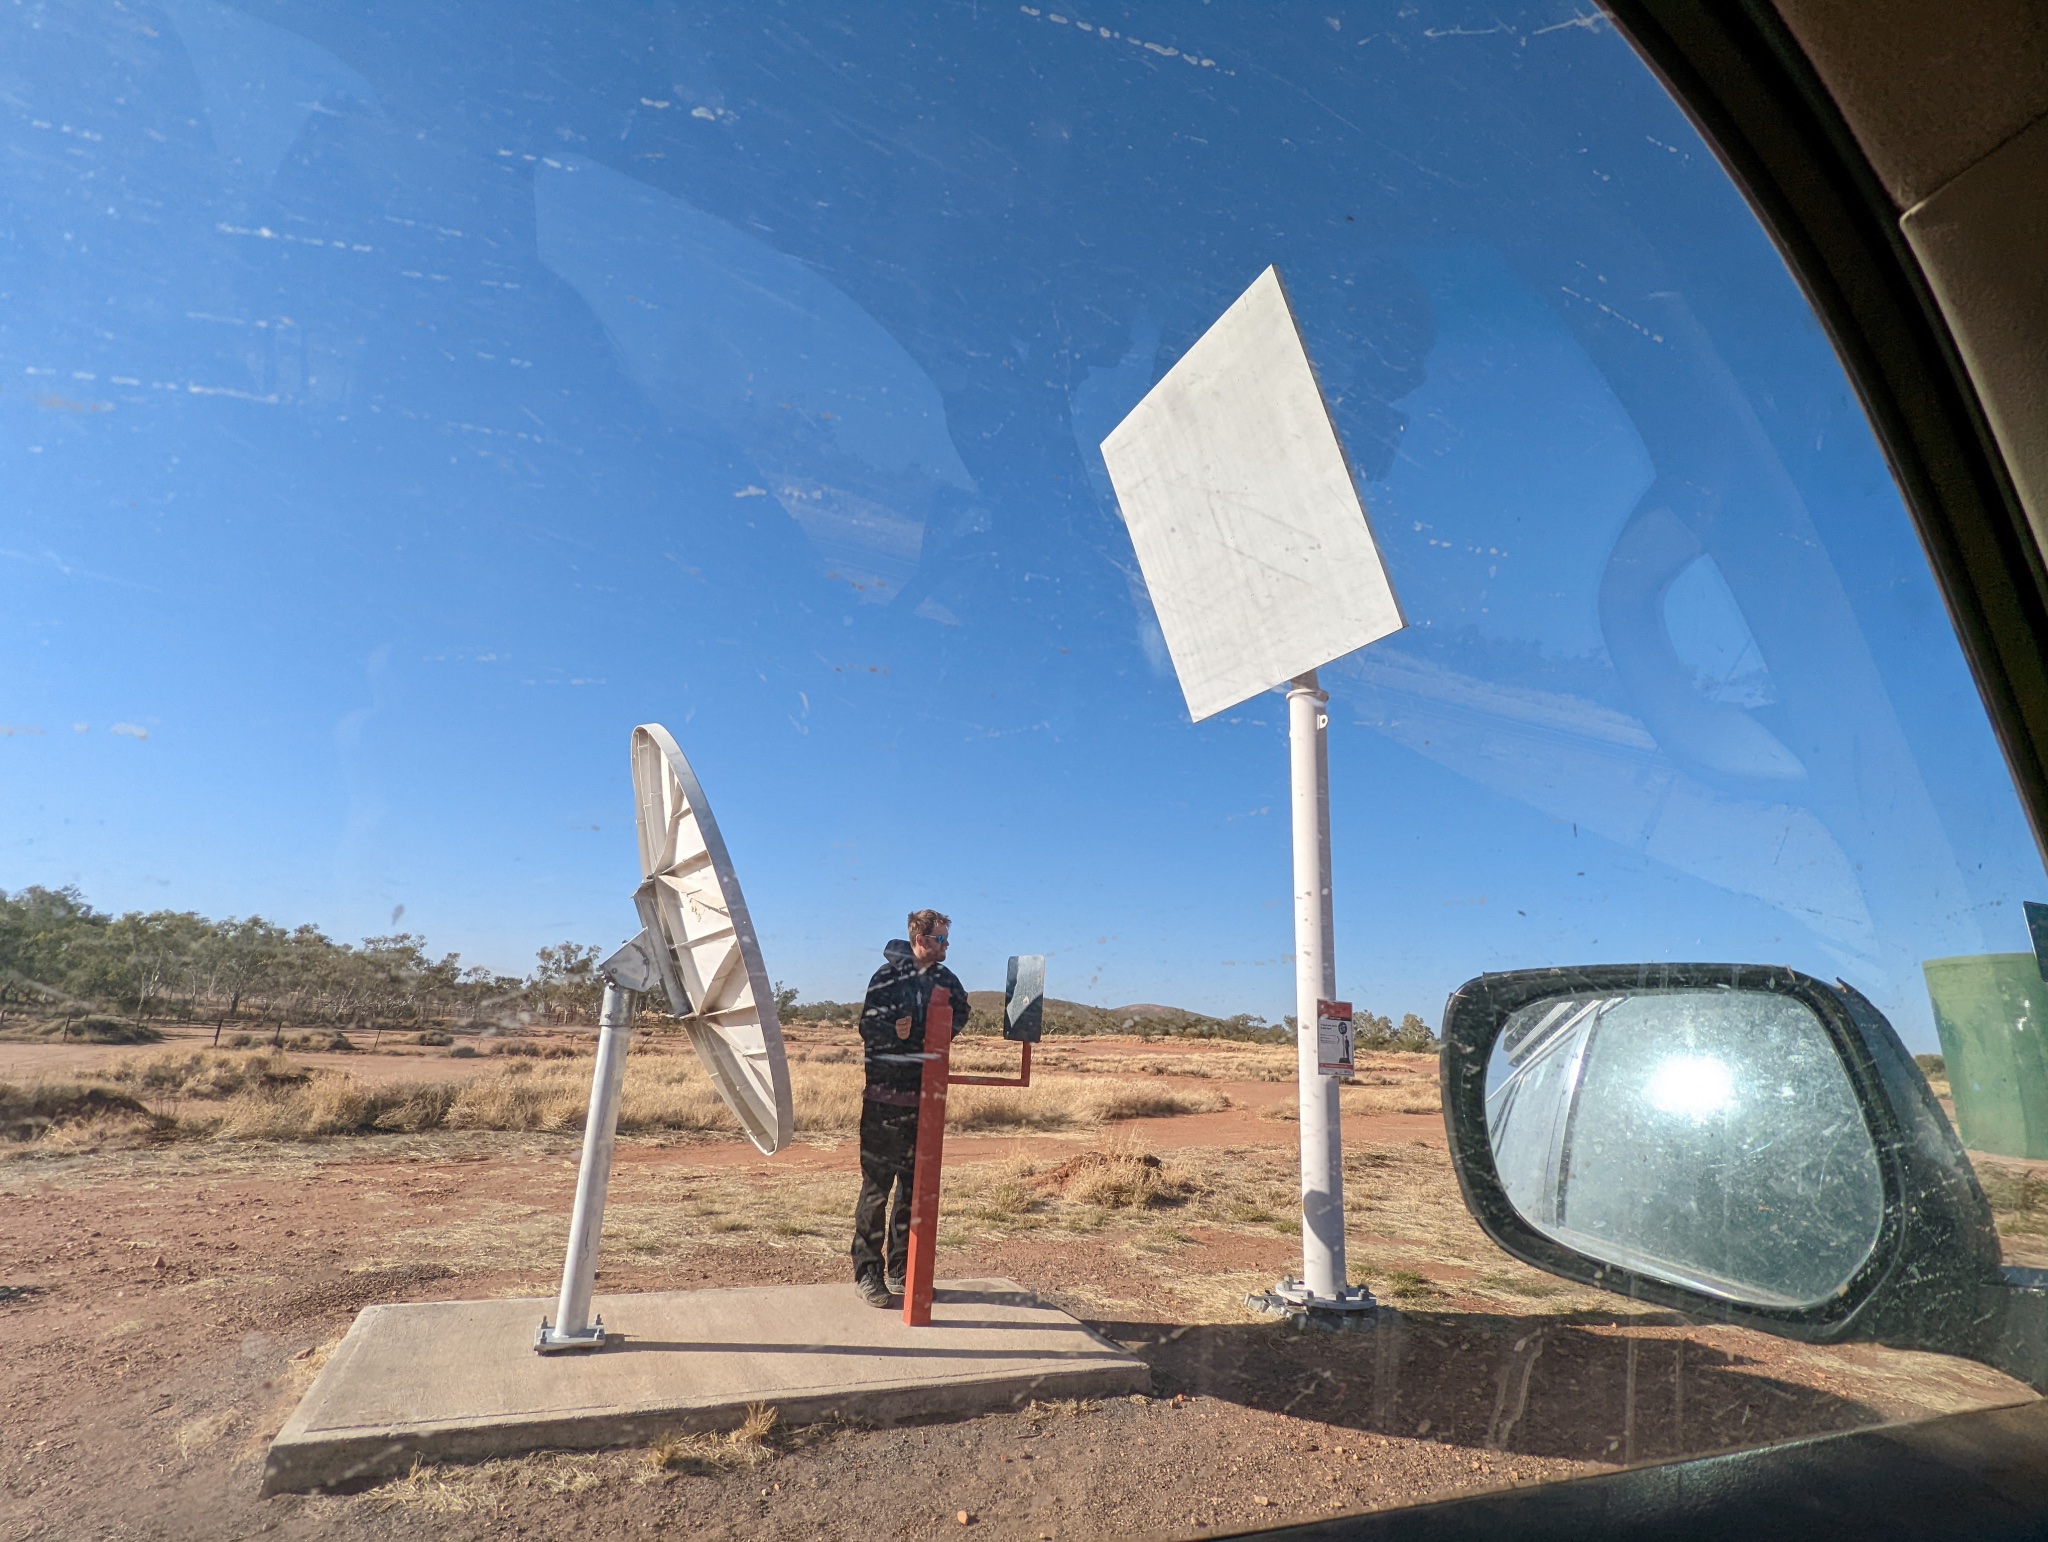 My dorky boy friend trying their best to get internet along the way using a road side passive RF reflector